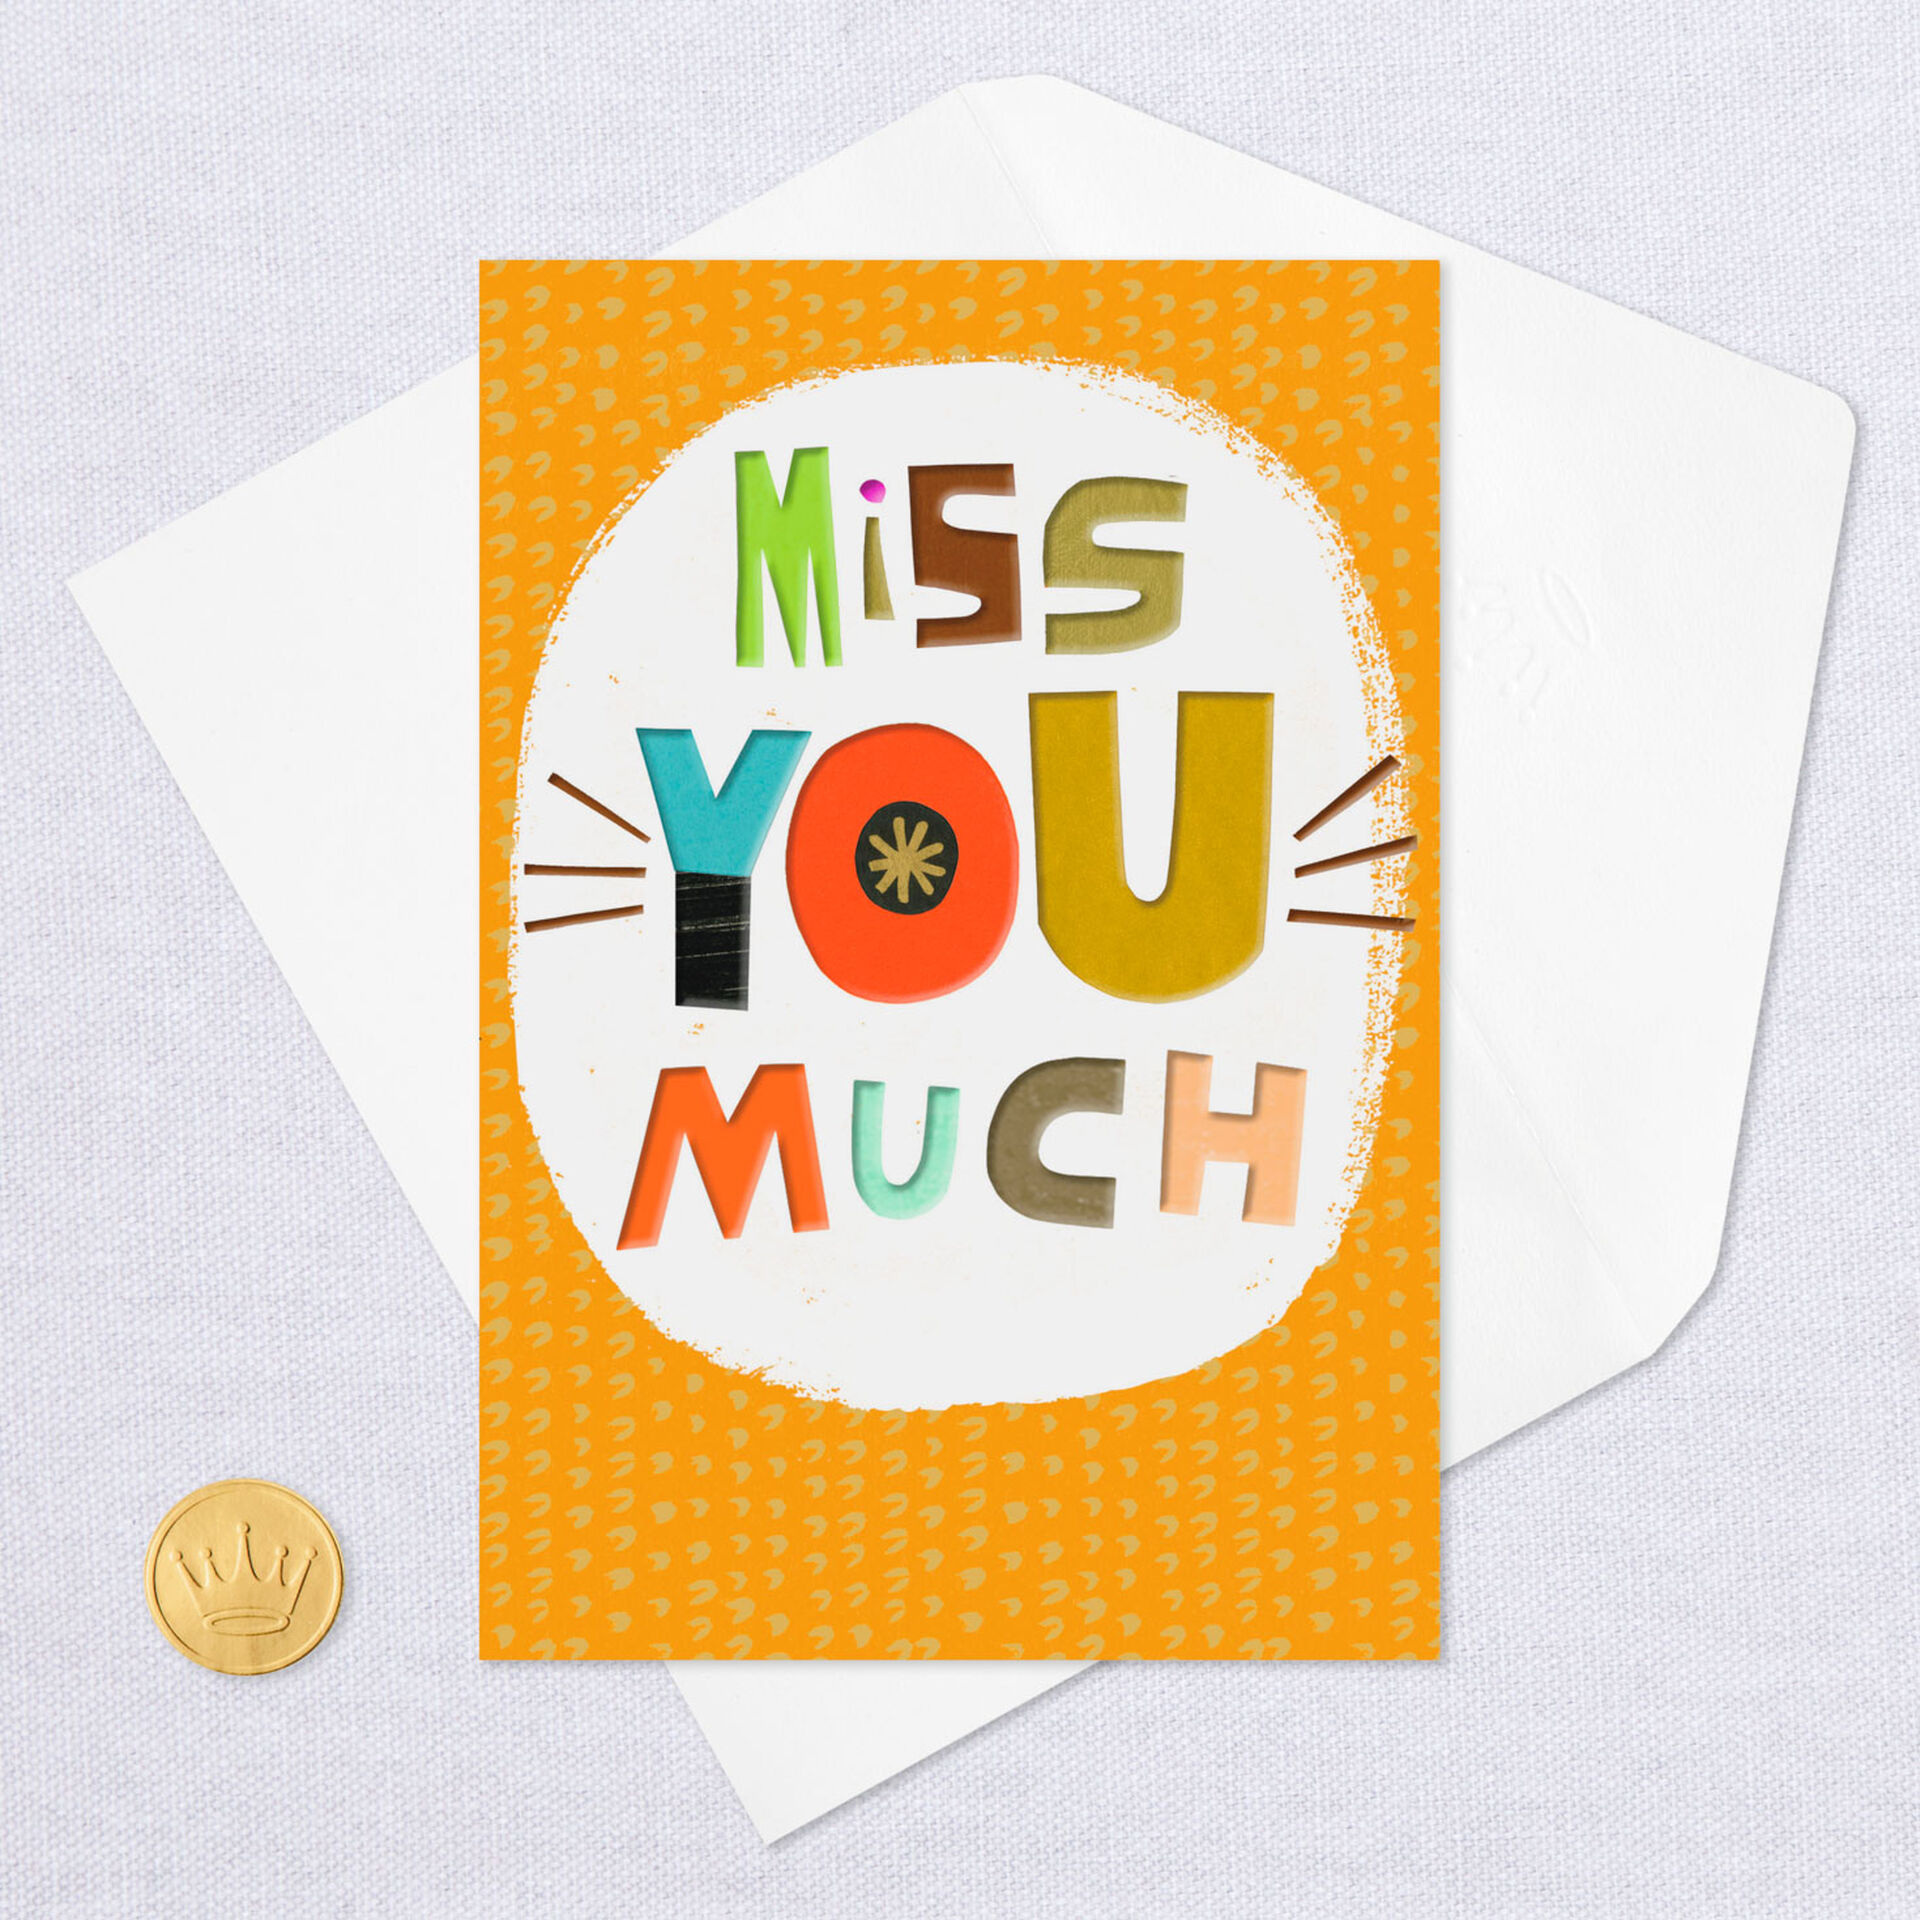 Foiled Greeting Card Sentimental With Special Wishes Missing You Lots